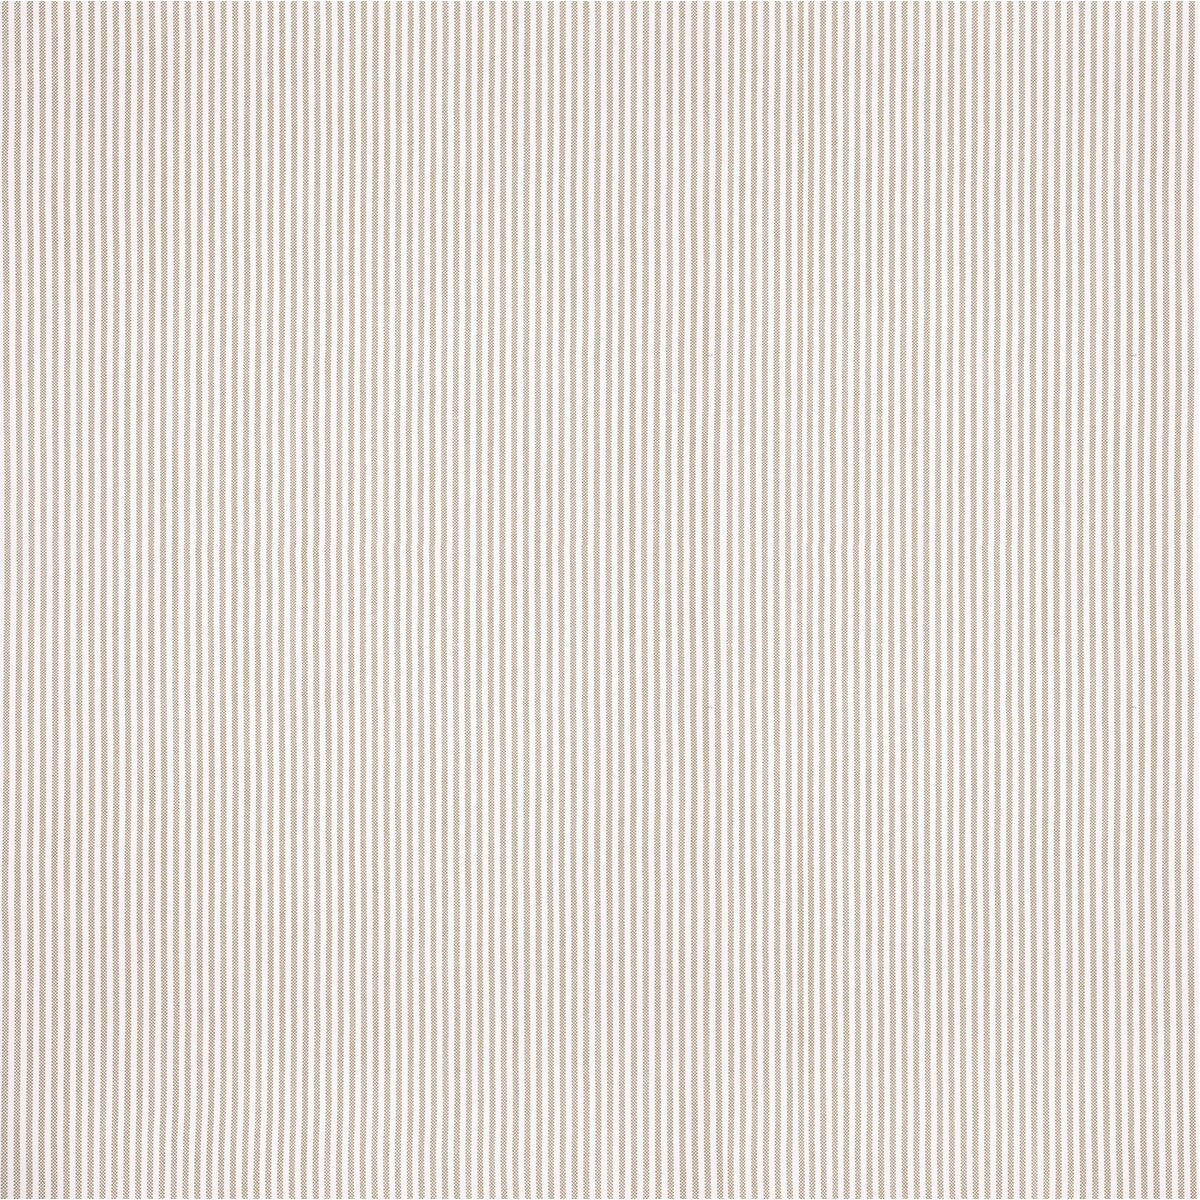 Laurence fabric in beige color - pattern GDT5386.7.0 - by Gaston y Daniela in the Gaston Africalia collection